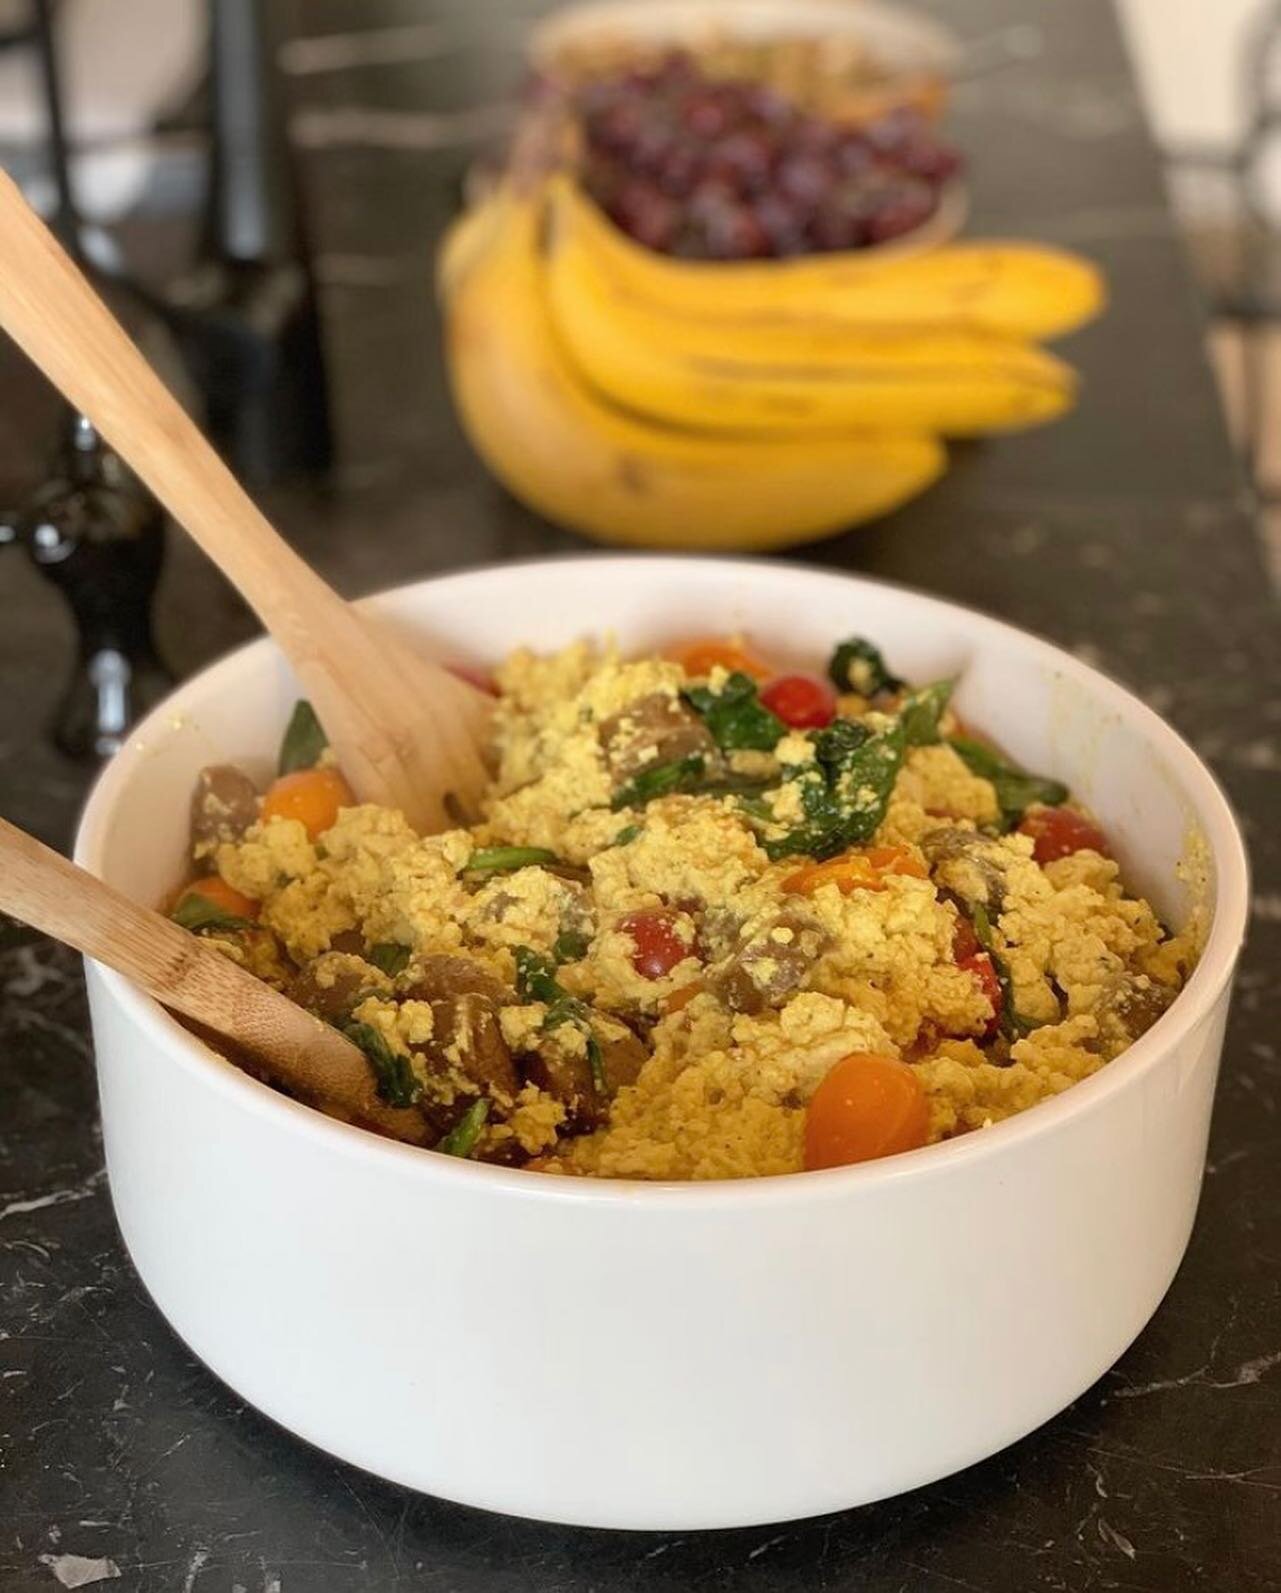 Let&rsquo;s bring back this tasty classic! You can never go wrong with a good tofu scramble.